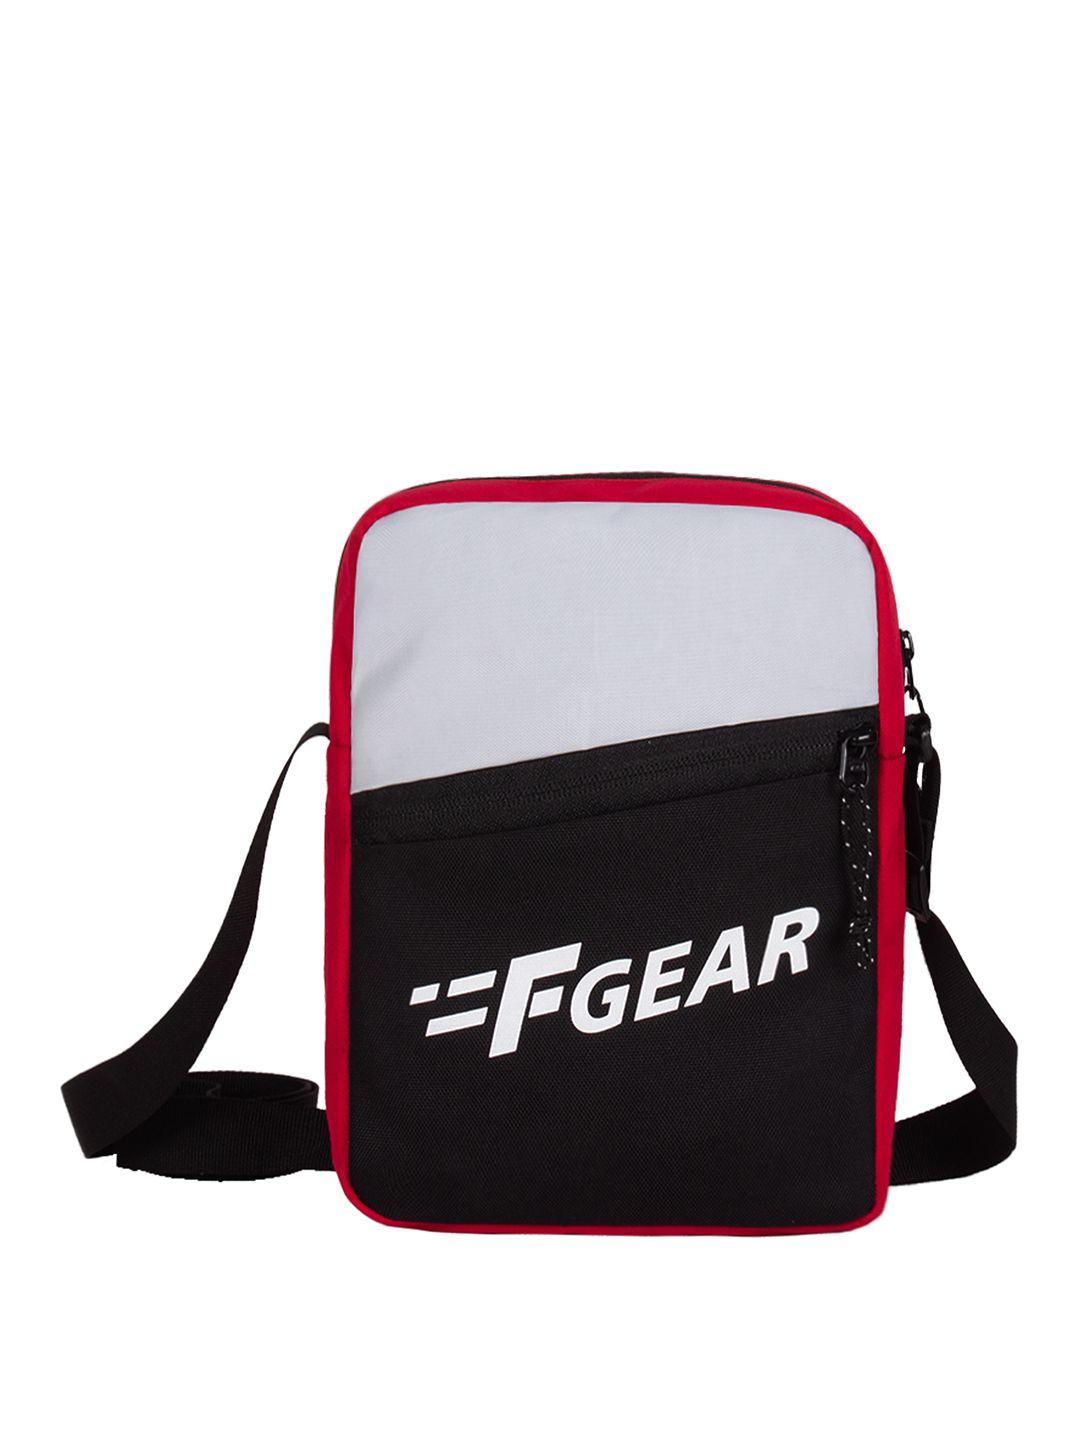 f gear printed structured sling bag